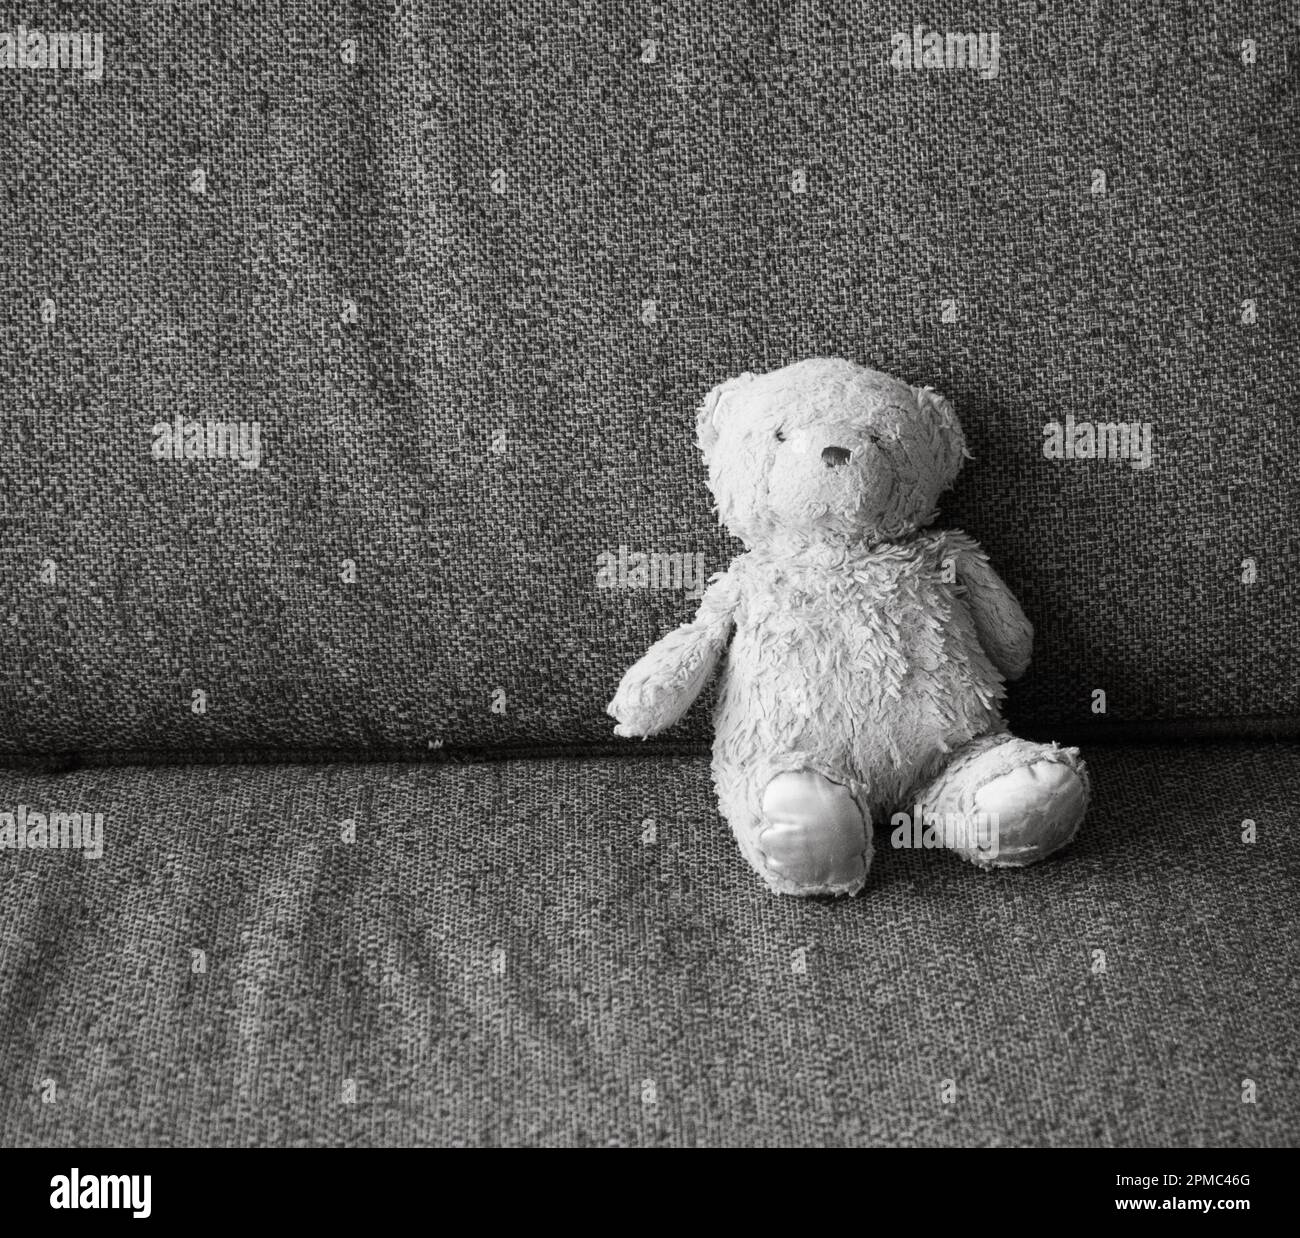 fuzzy well-loved teddy bears siting on a textured couch. Stock Photo